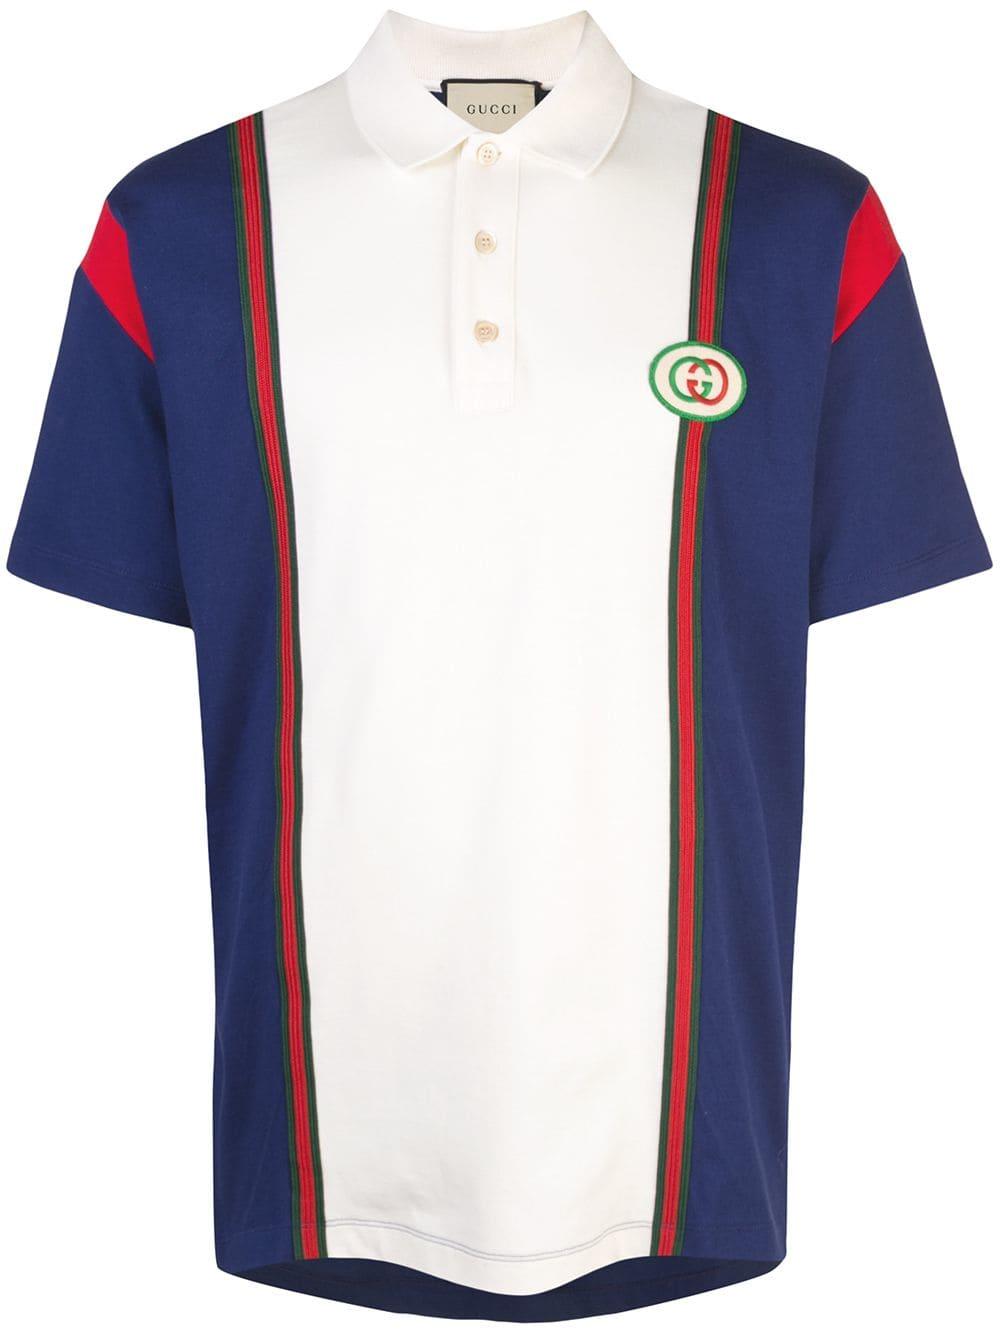 Gucci Cotton Paneled Polo Shirt in Blue for Men - Lyst